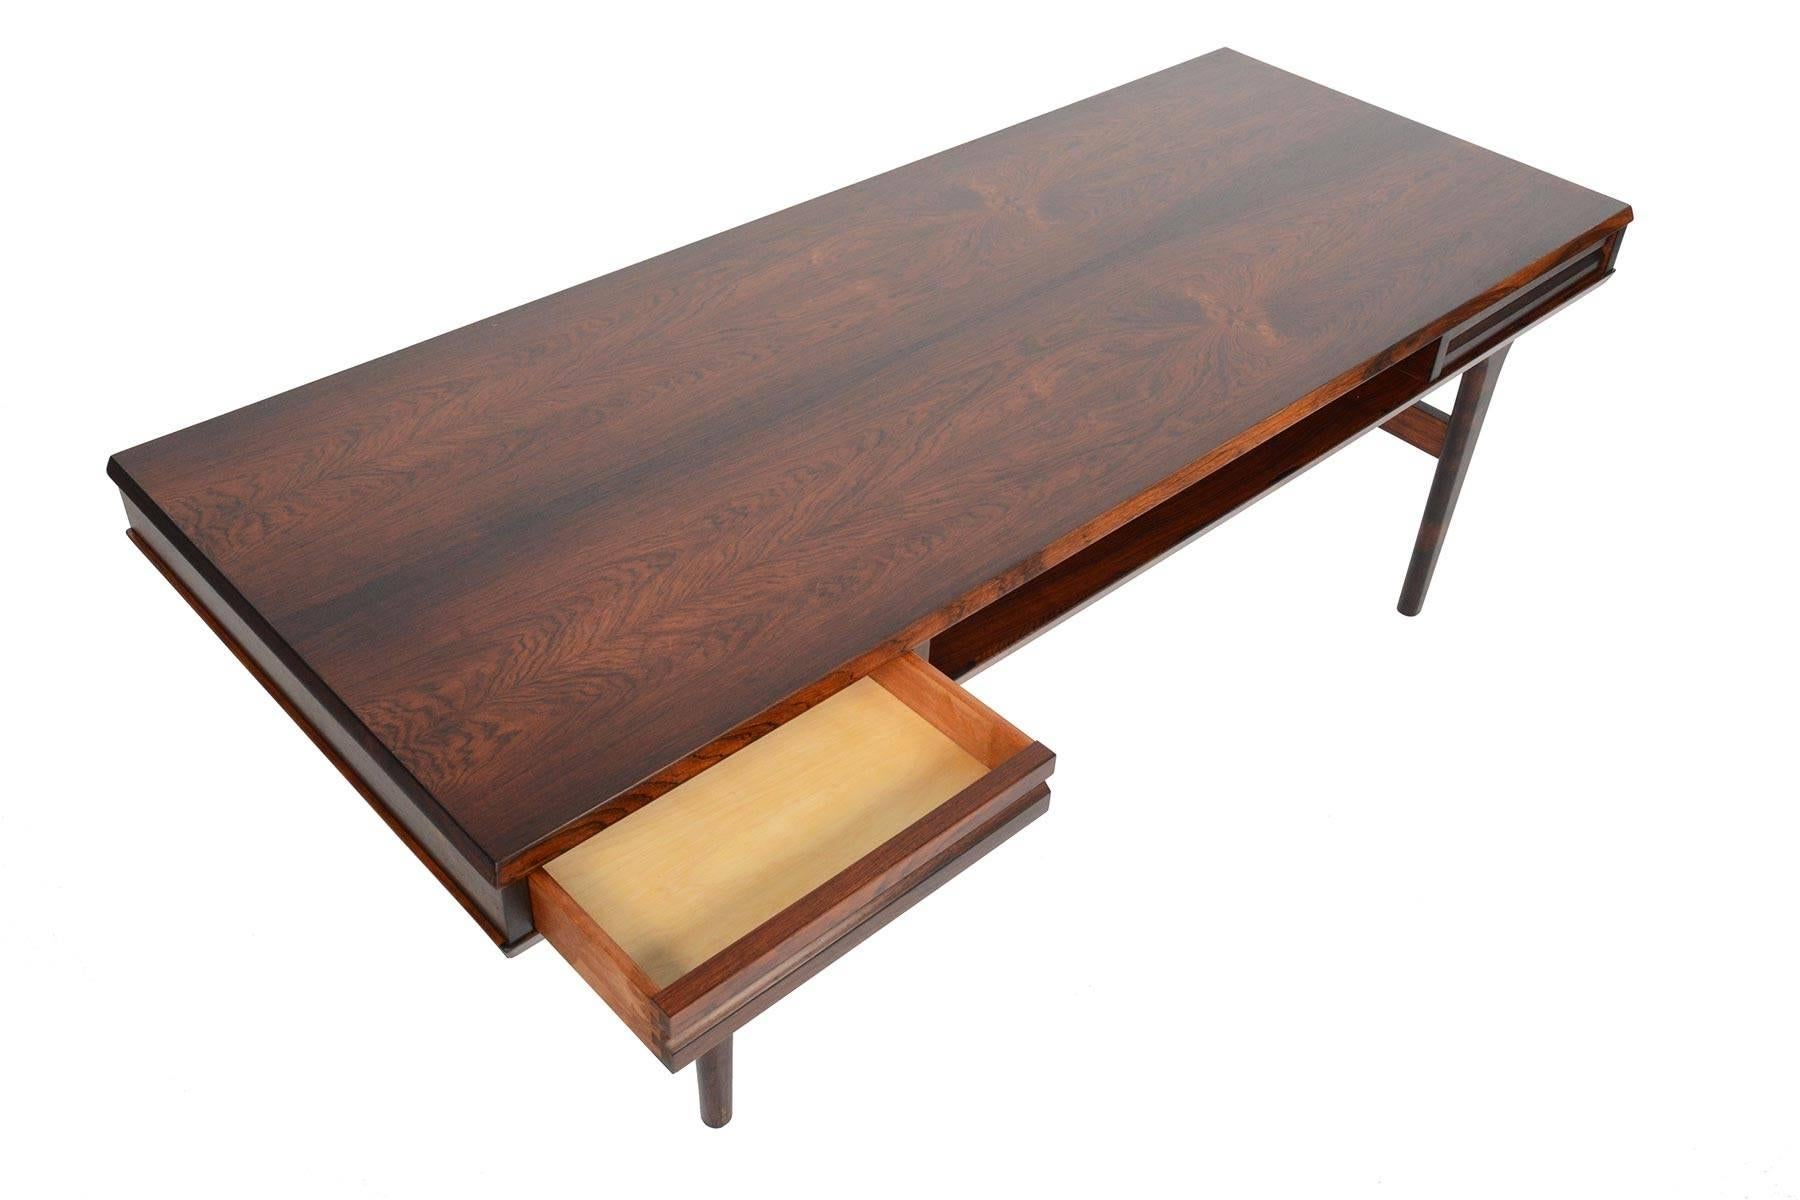 This Danish modern coffee table in rosewood is designed with handsome lines and offers exceptional storage! Beneath a large slab of bookmatched rosewood, sits two drawers that can be opened from either side of the table. A spacious cubby sits in the